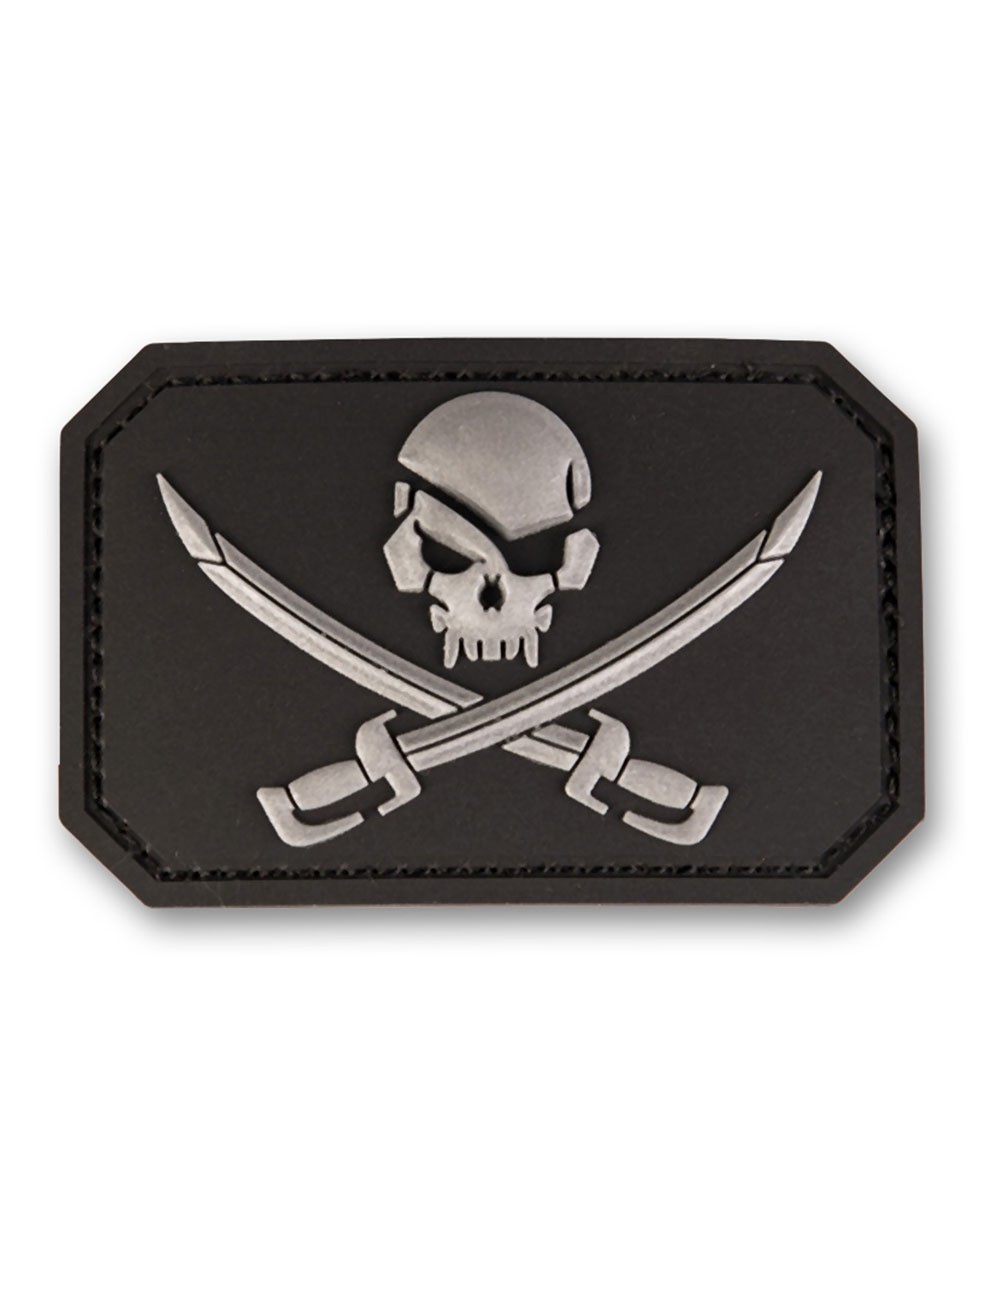 3D PVC Patch Pirate Sale With 16832202 Swords Jolly Roger Skull